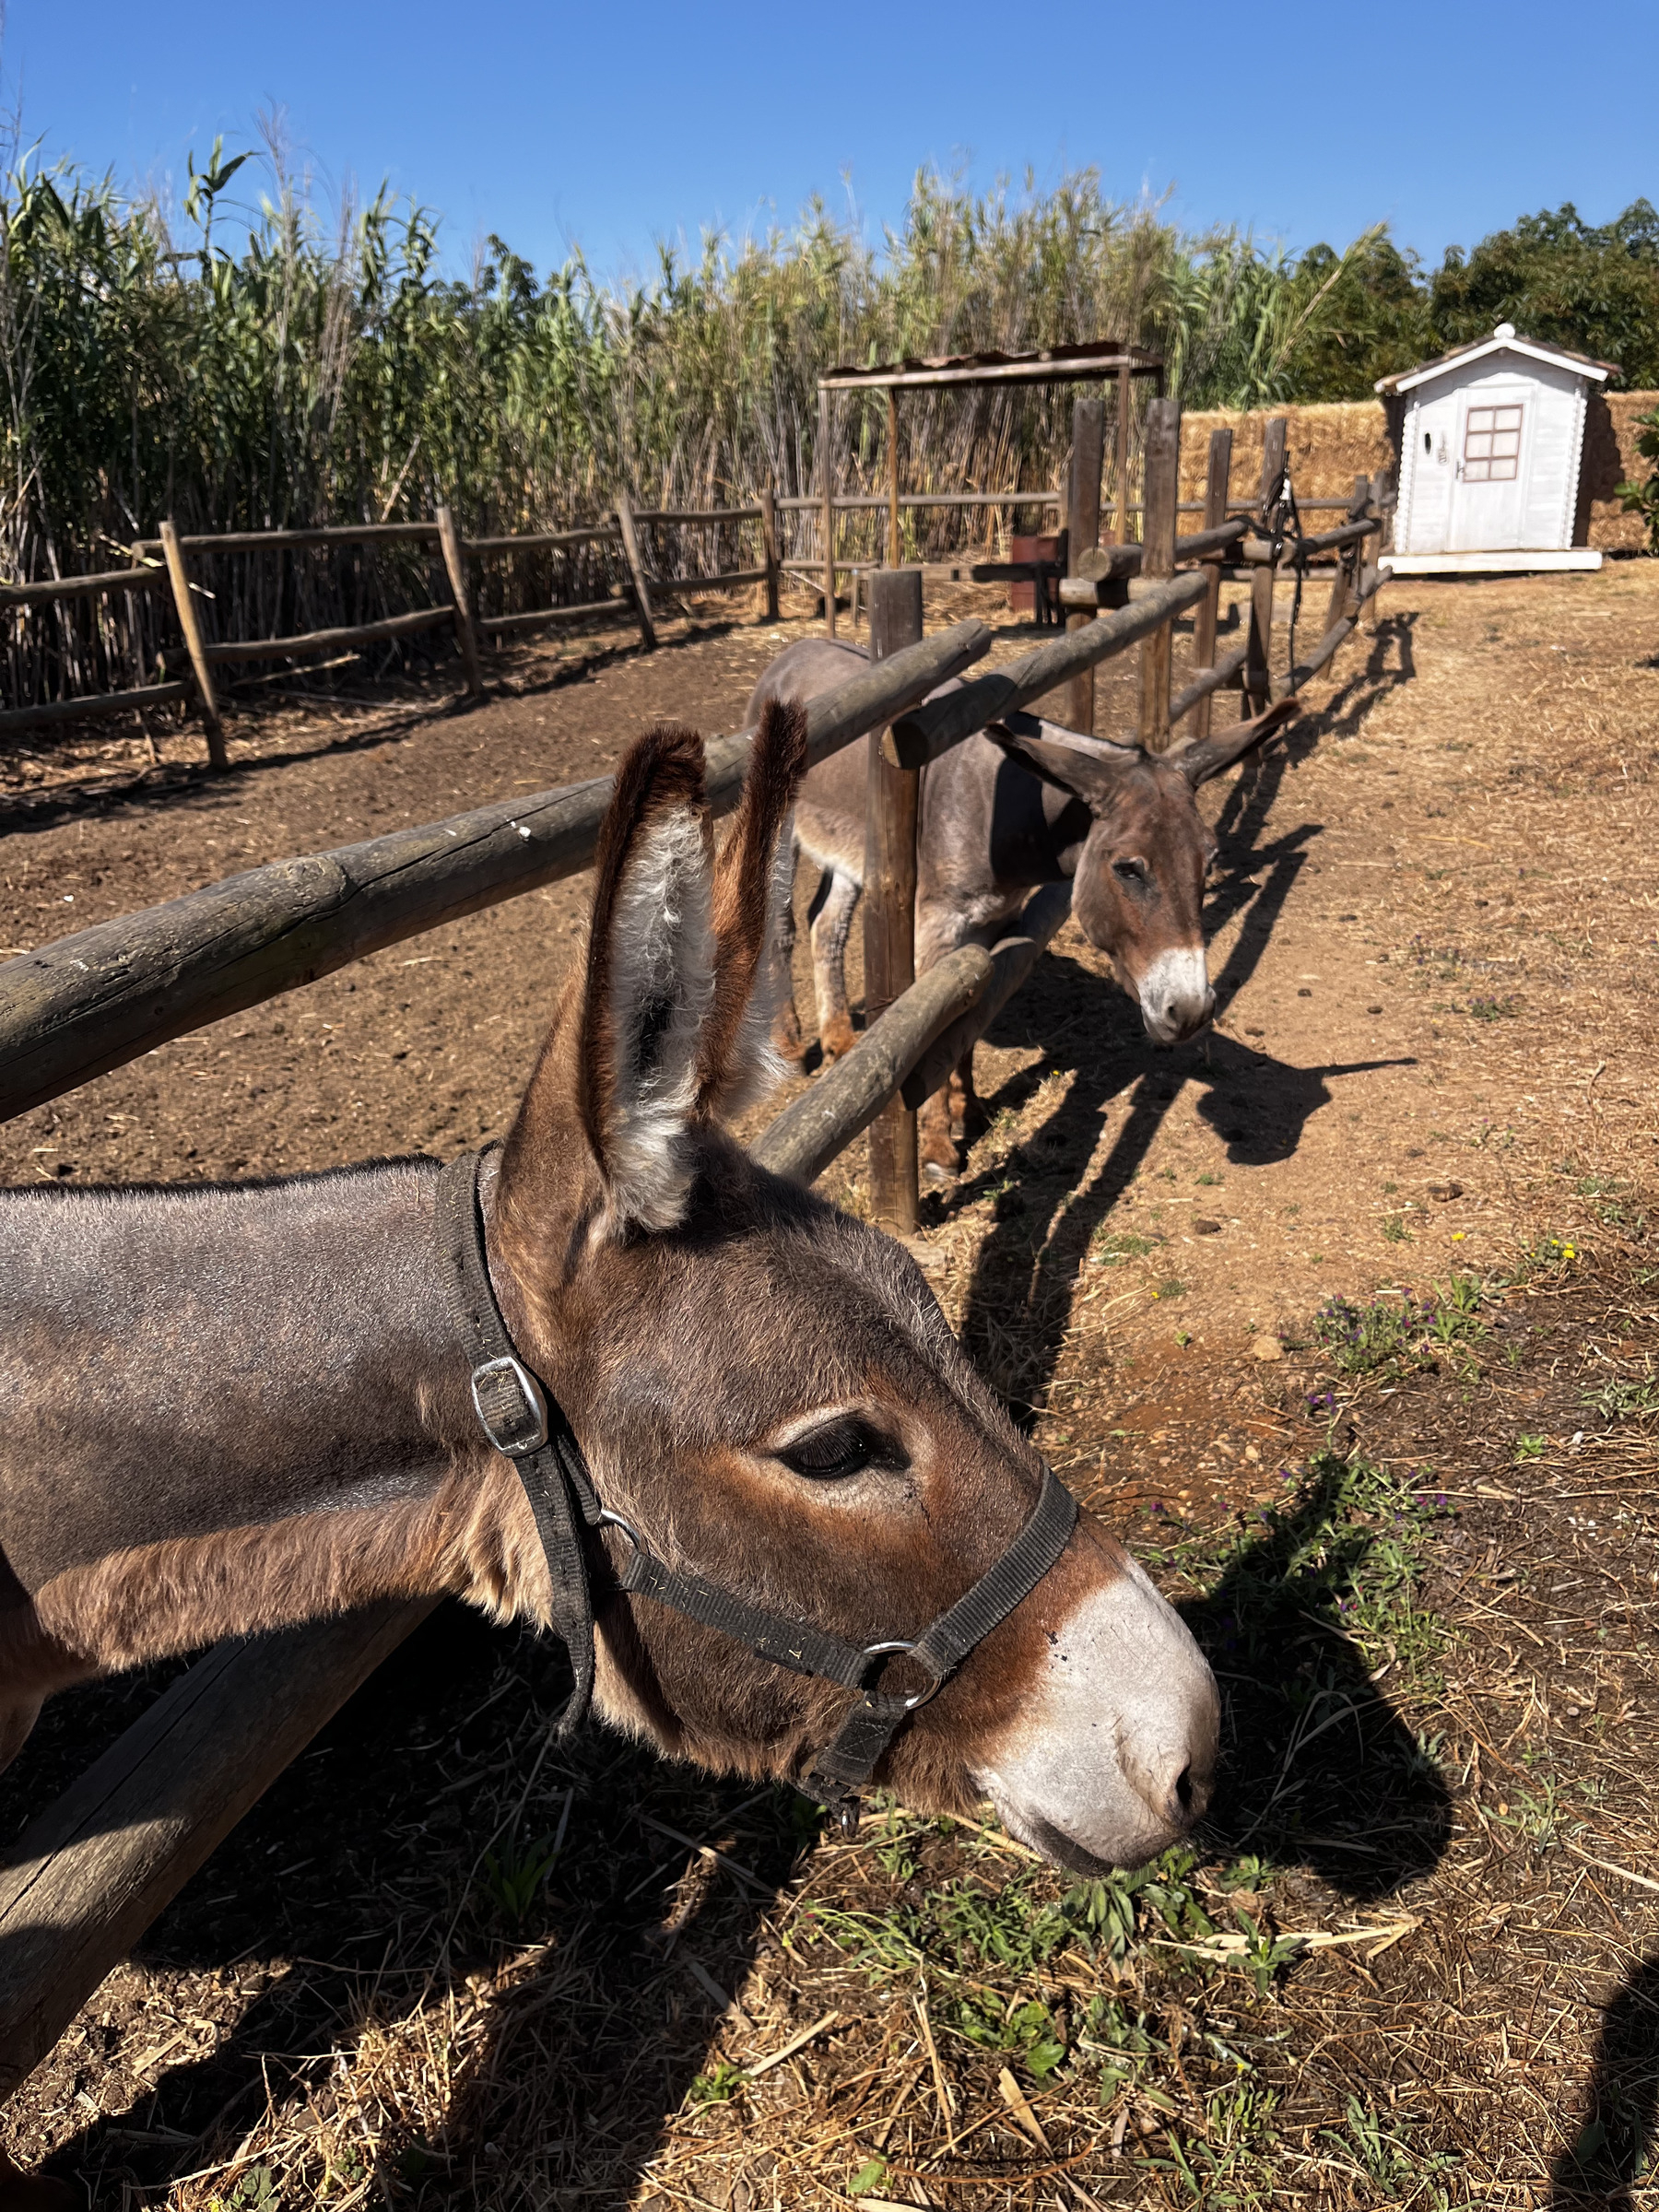 Two donkeys stick their heads through a corral that they are housed in